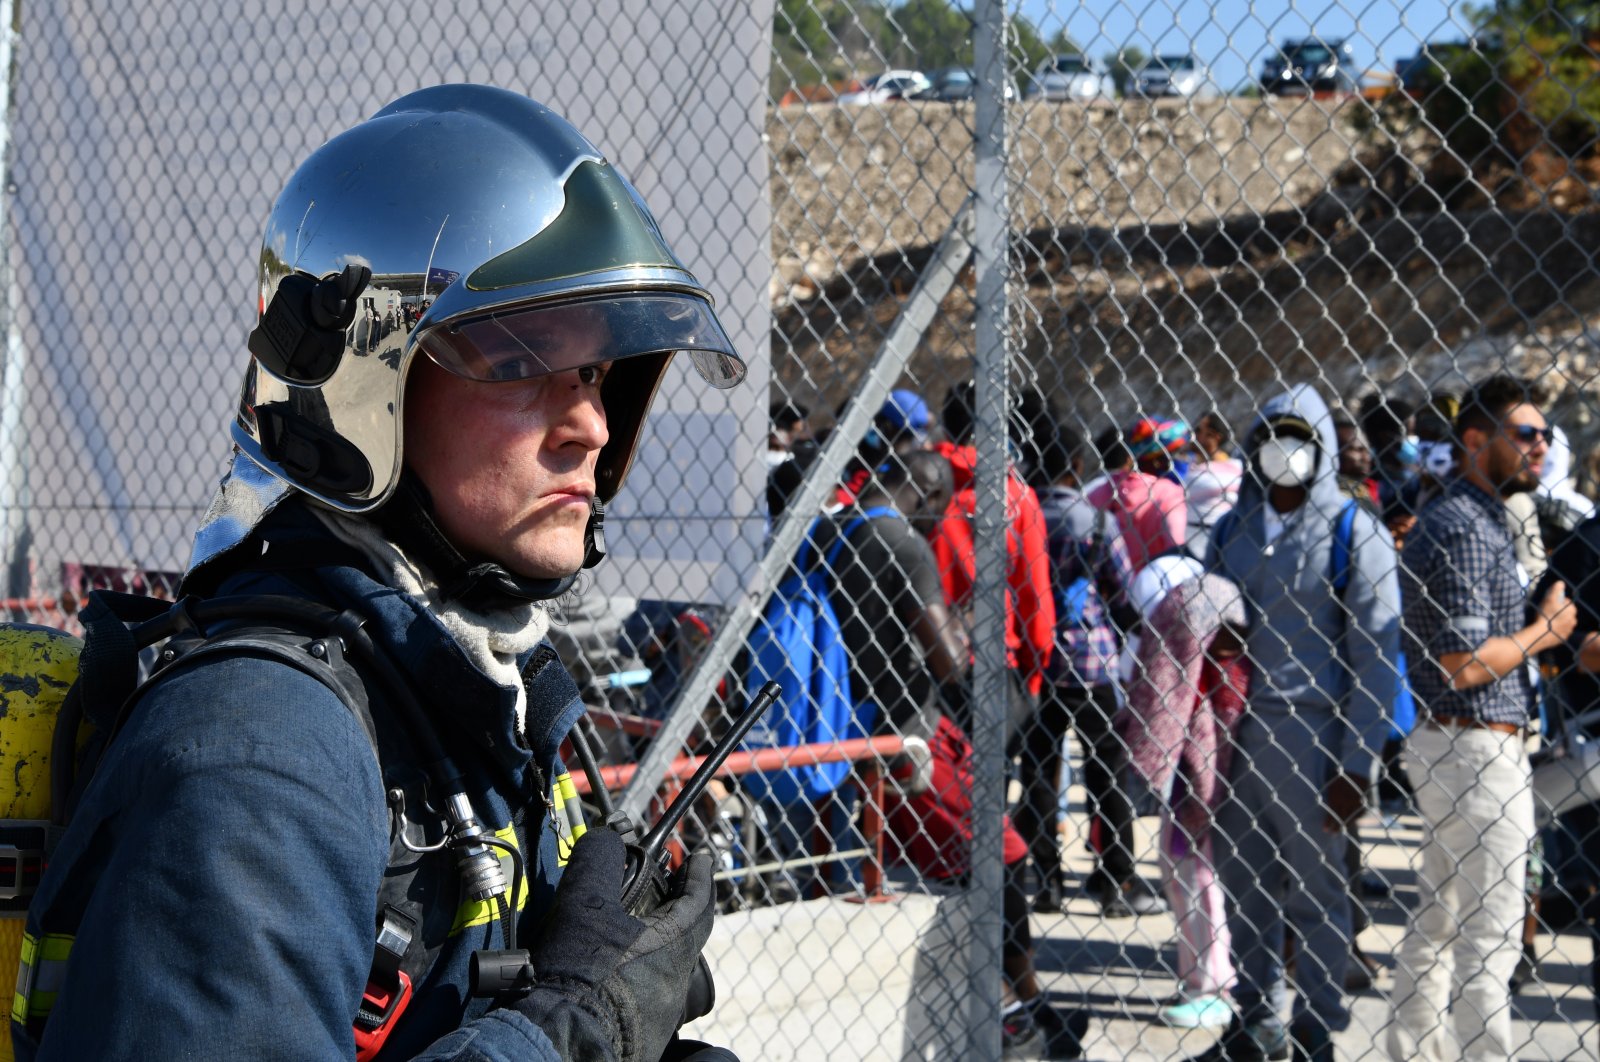 Evacuation of migrants at the closed camp for asylum-seekers in Samos island, Greece, Oct. 22, 2021, during the exercise "Promachos 2021" organized by the Greek Ministry of Migration and Asylum. (EPA File Photo)